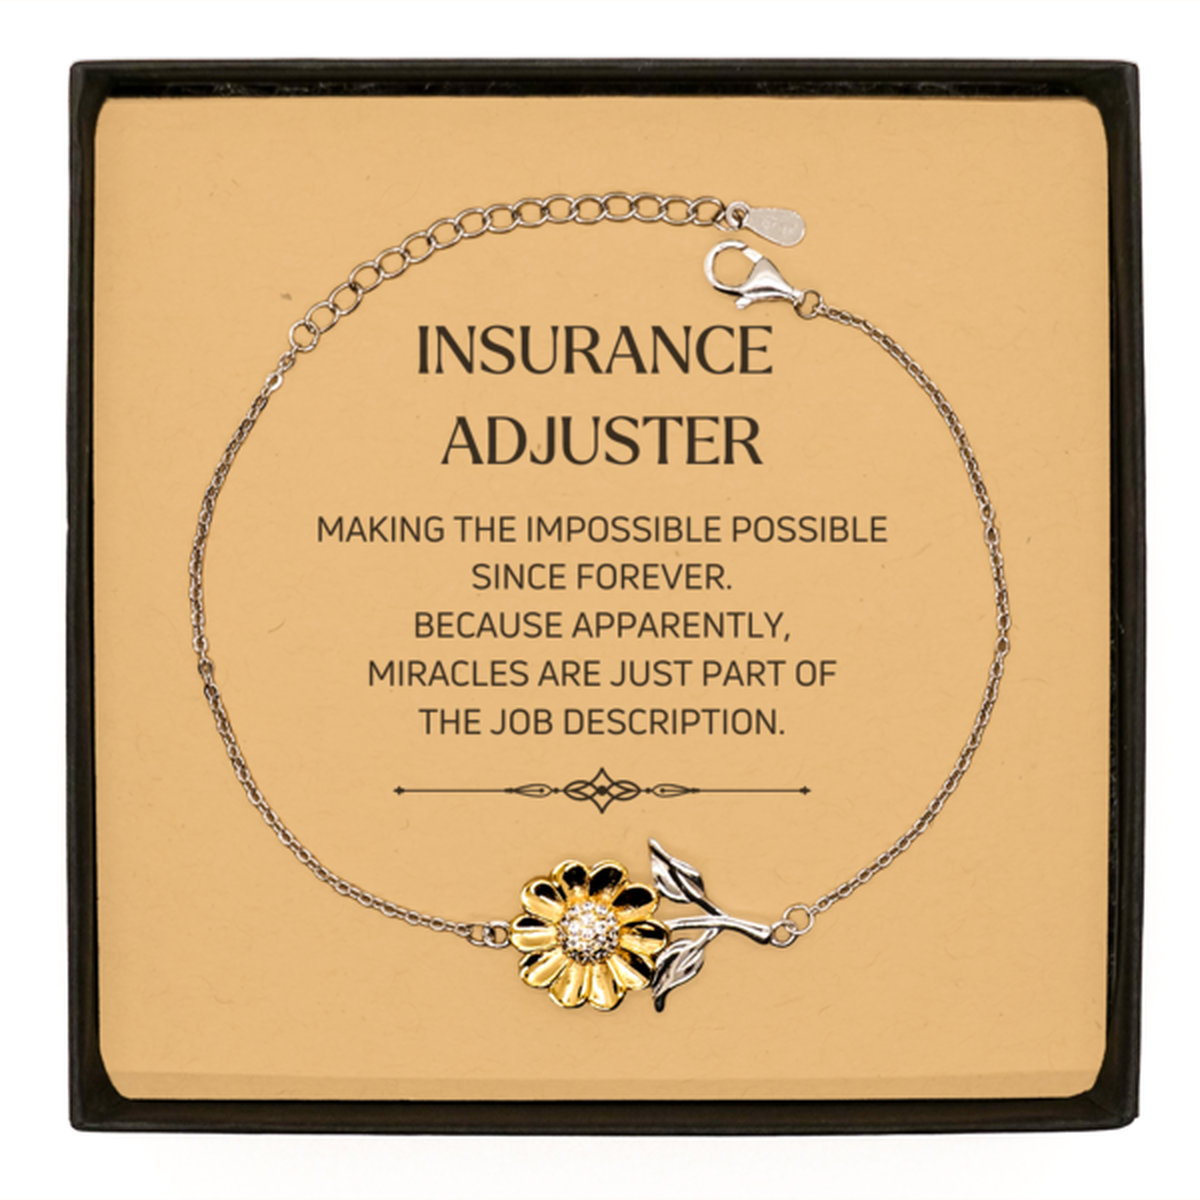 Funny Insurance Adjuster Gifts, Miracles are just part of the job description, Inspirational Birthday Sunflower Bracelet For Insurance Adjuster, Men, Women, Coworkers, Friends, Boss